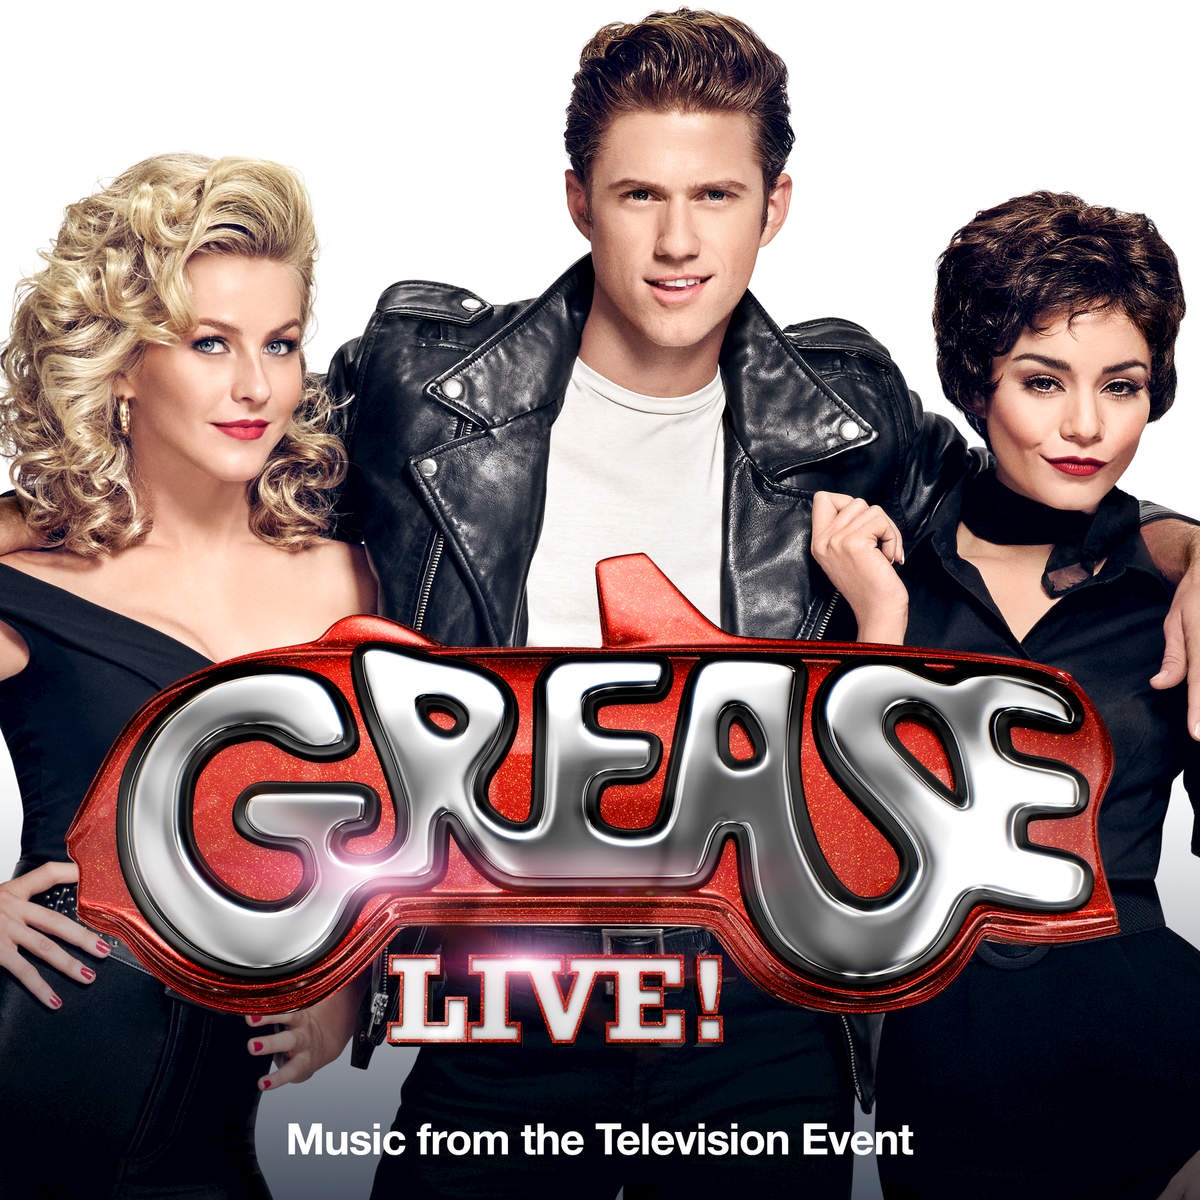 Born To Hand Jive - From "Grease Live!" Music From The Television Event